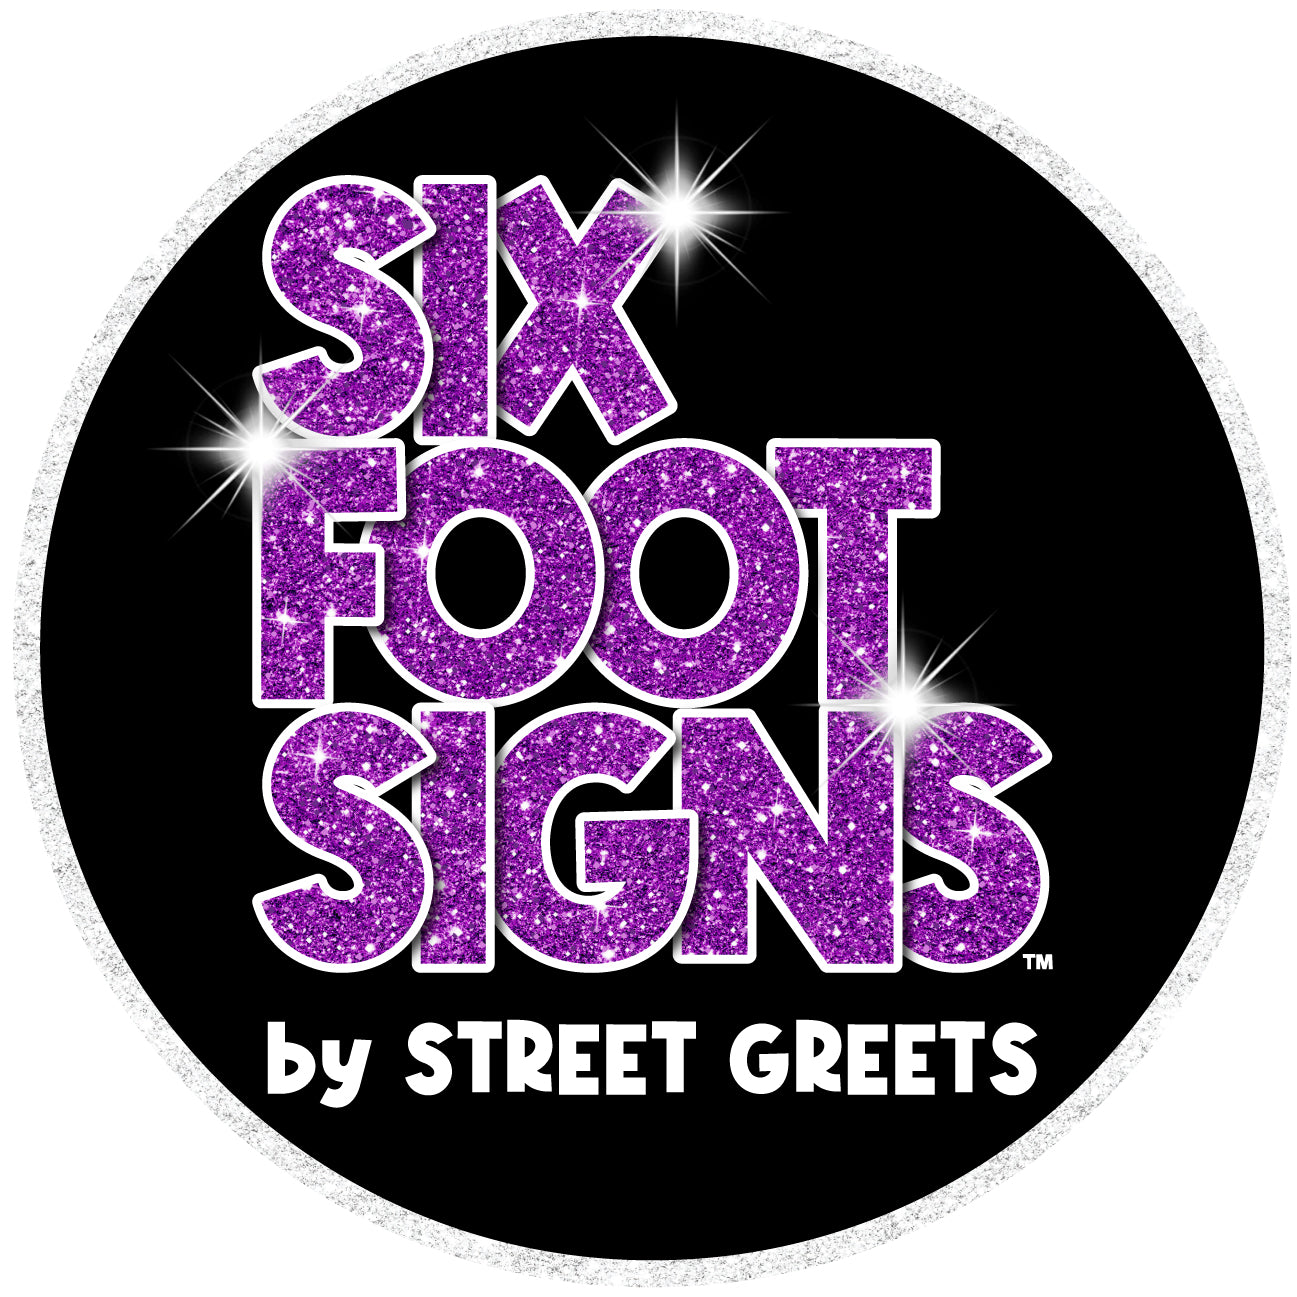 SixFootSigns by Street Greets